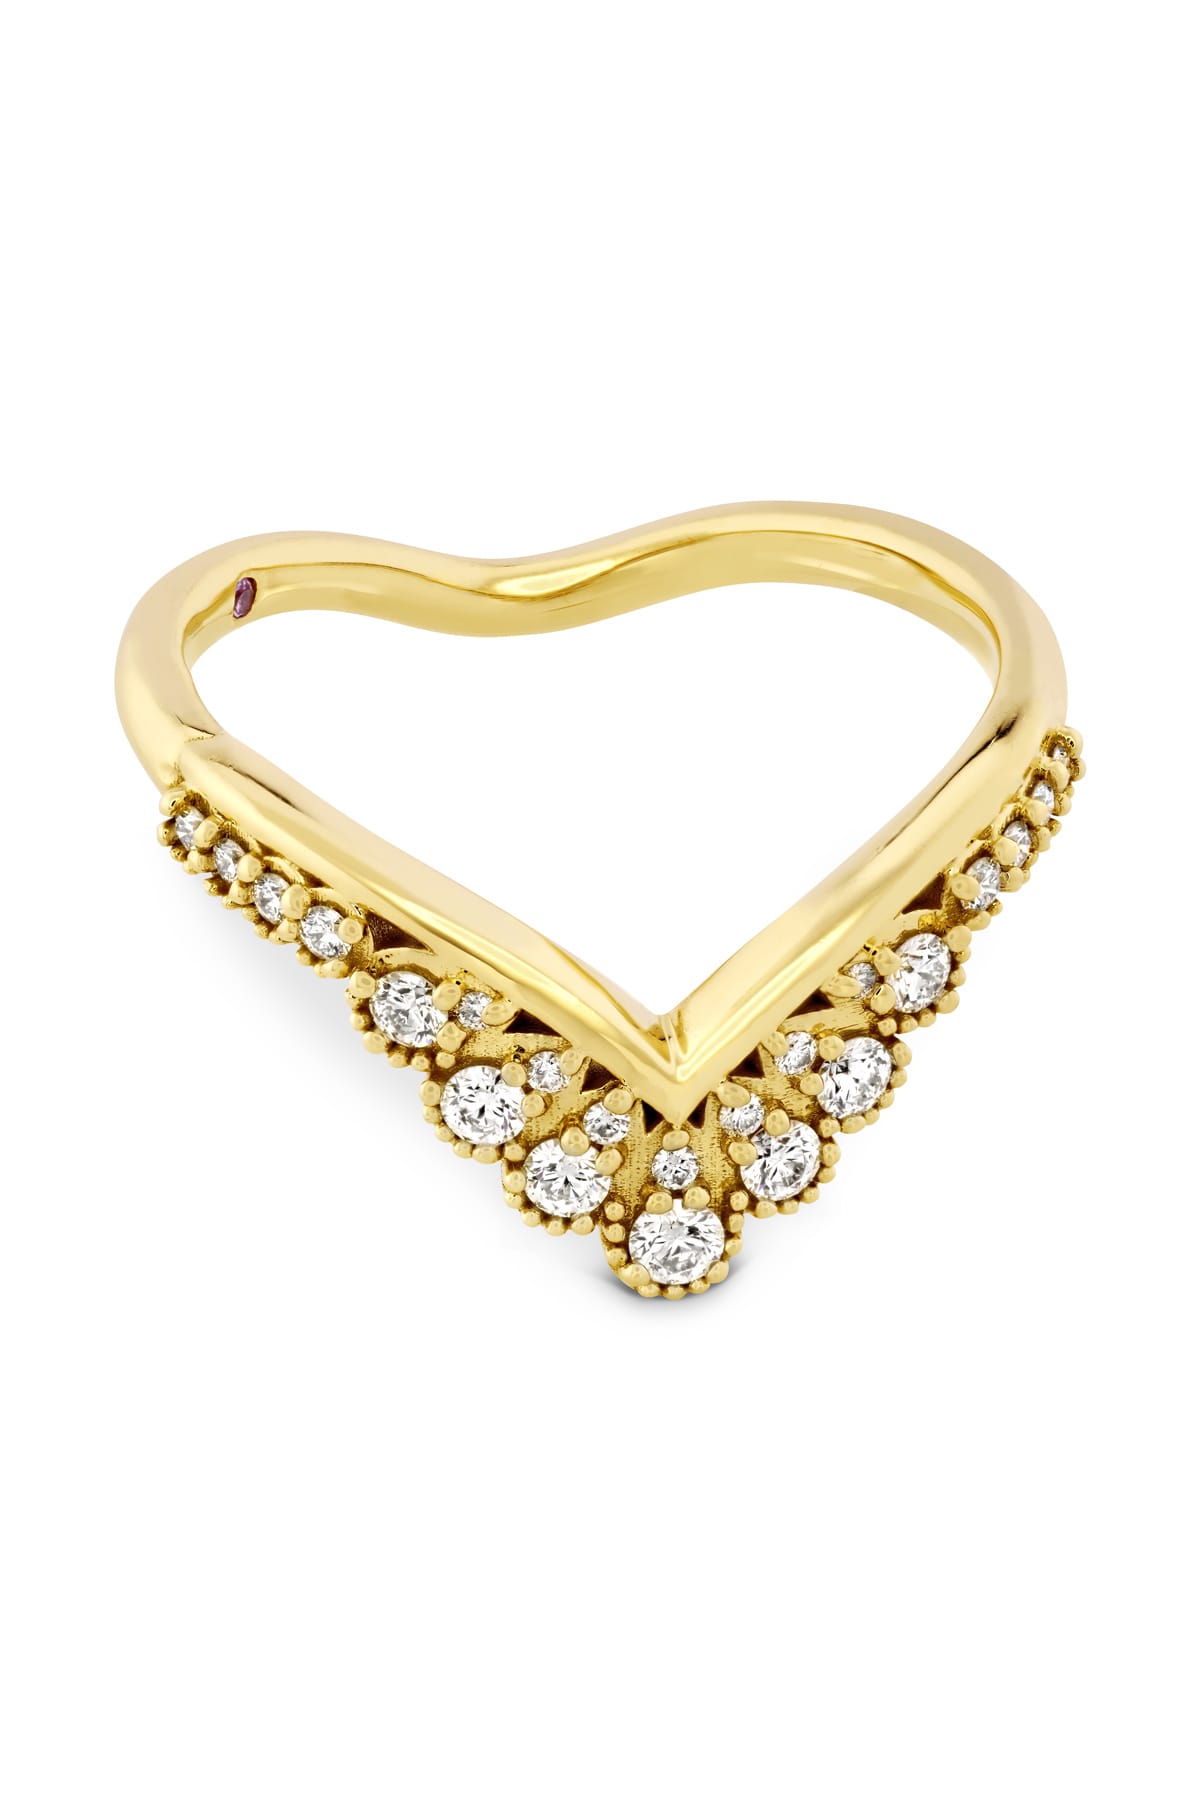 Behati Silhouette Power Band From Hearts On Fire available at LeGassick Diamonds and Jewellery Gold Coast, Australia.